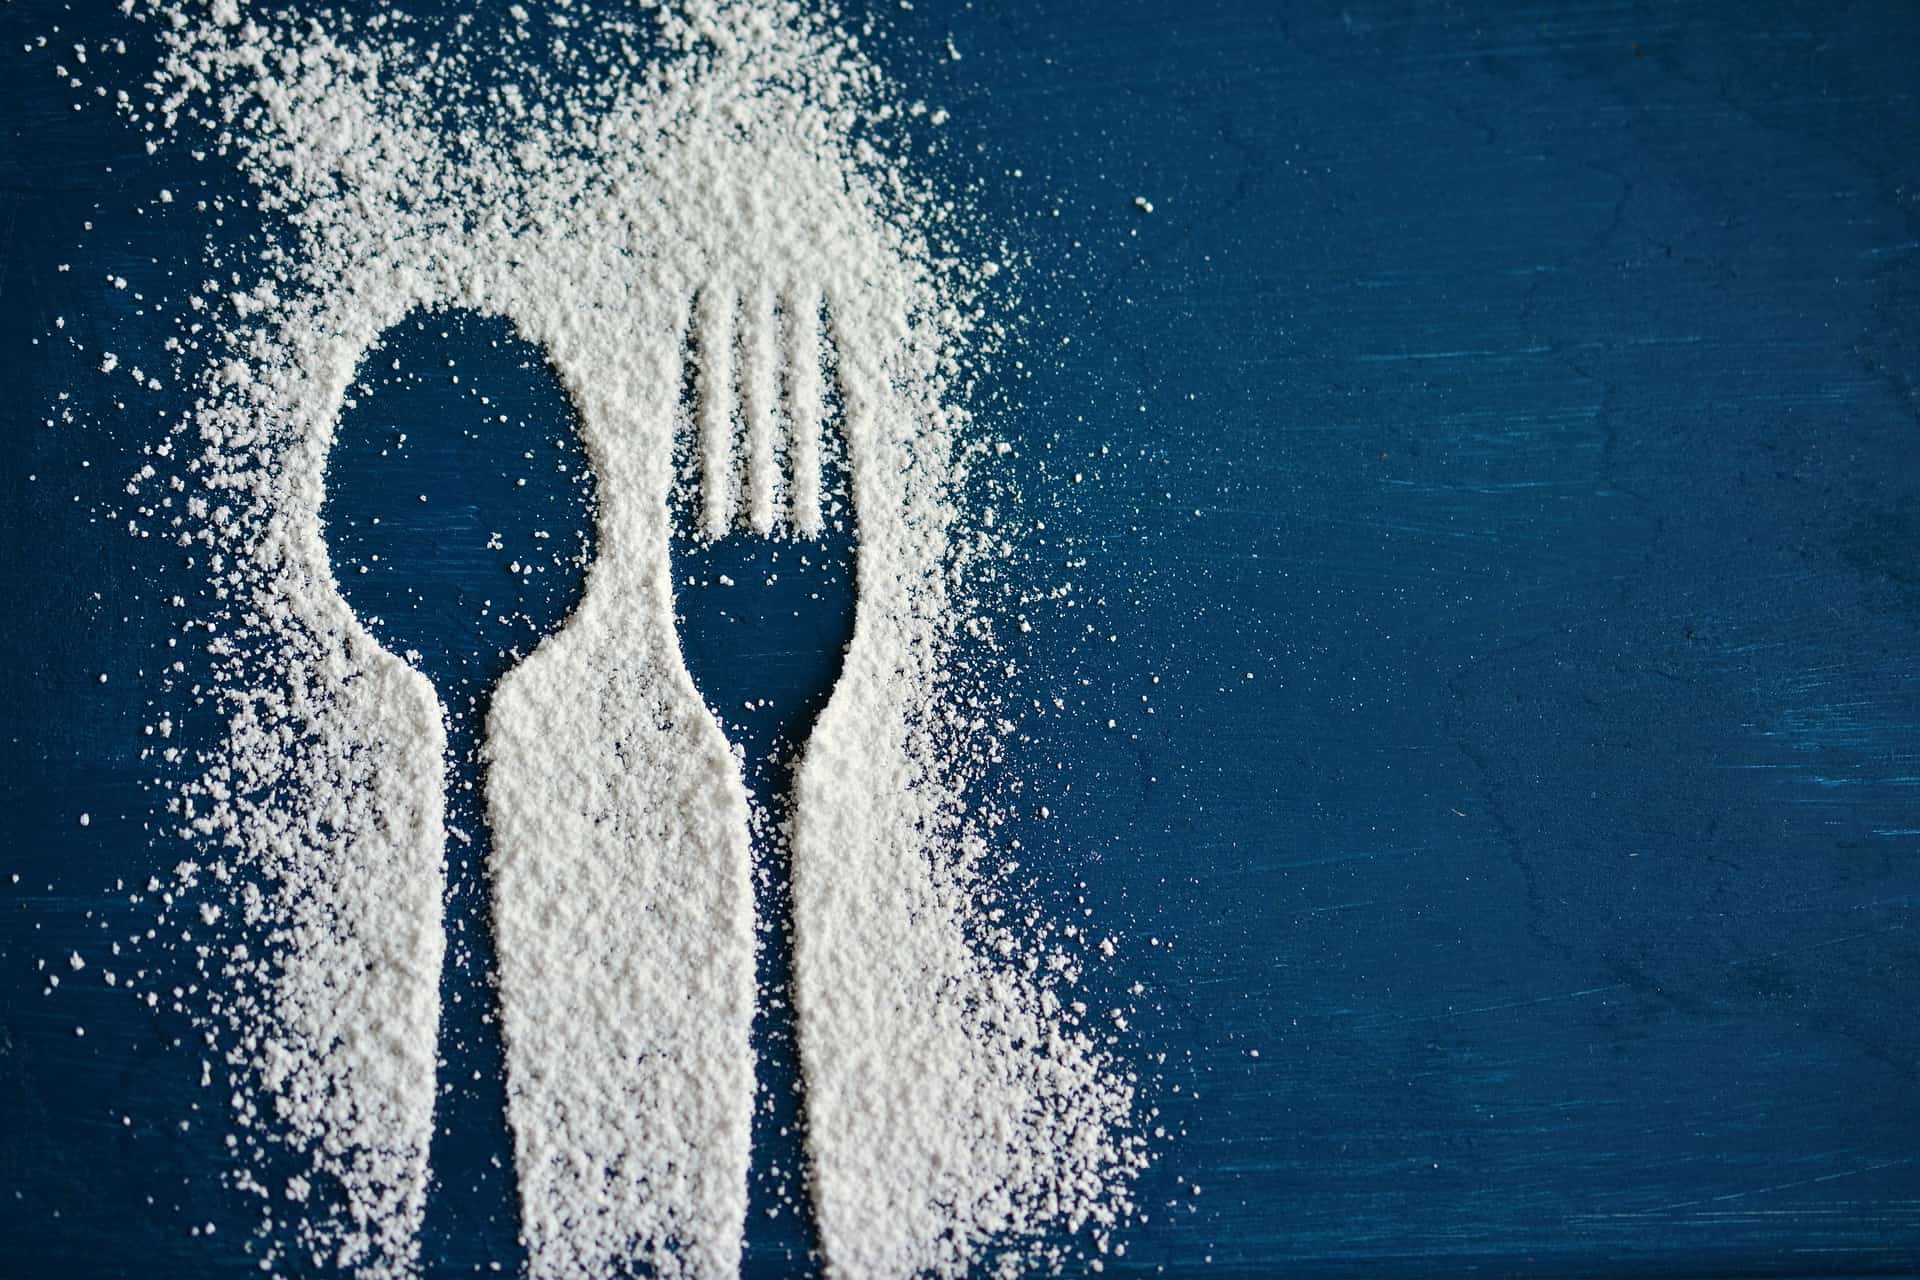 Diabetes and Sugar: The Bitter Effects on Health